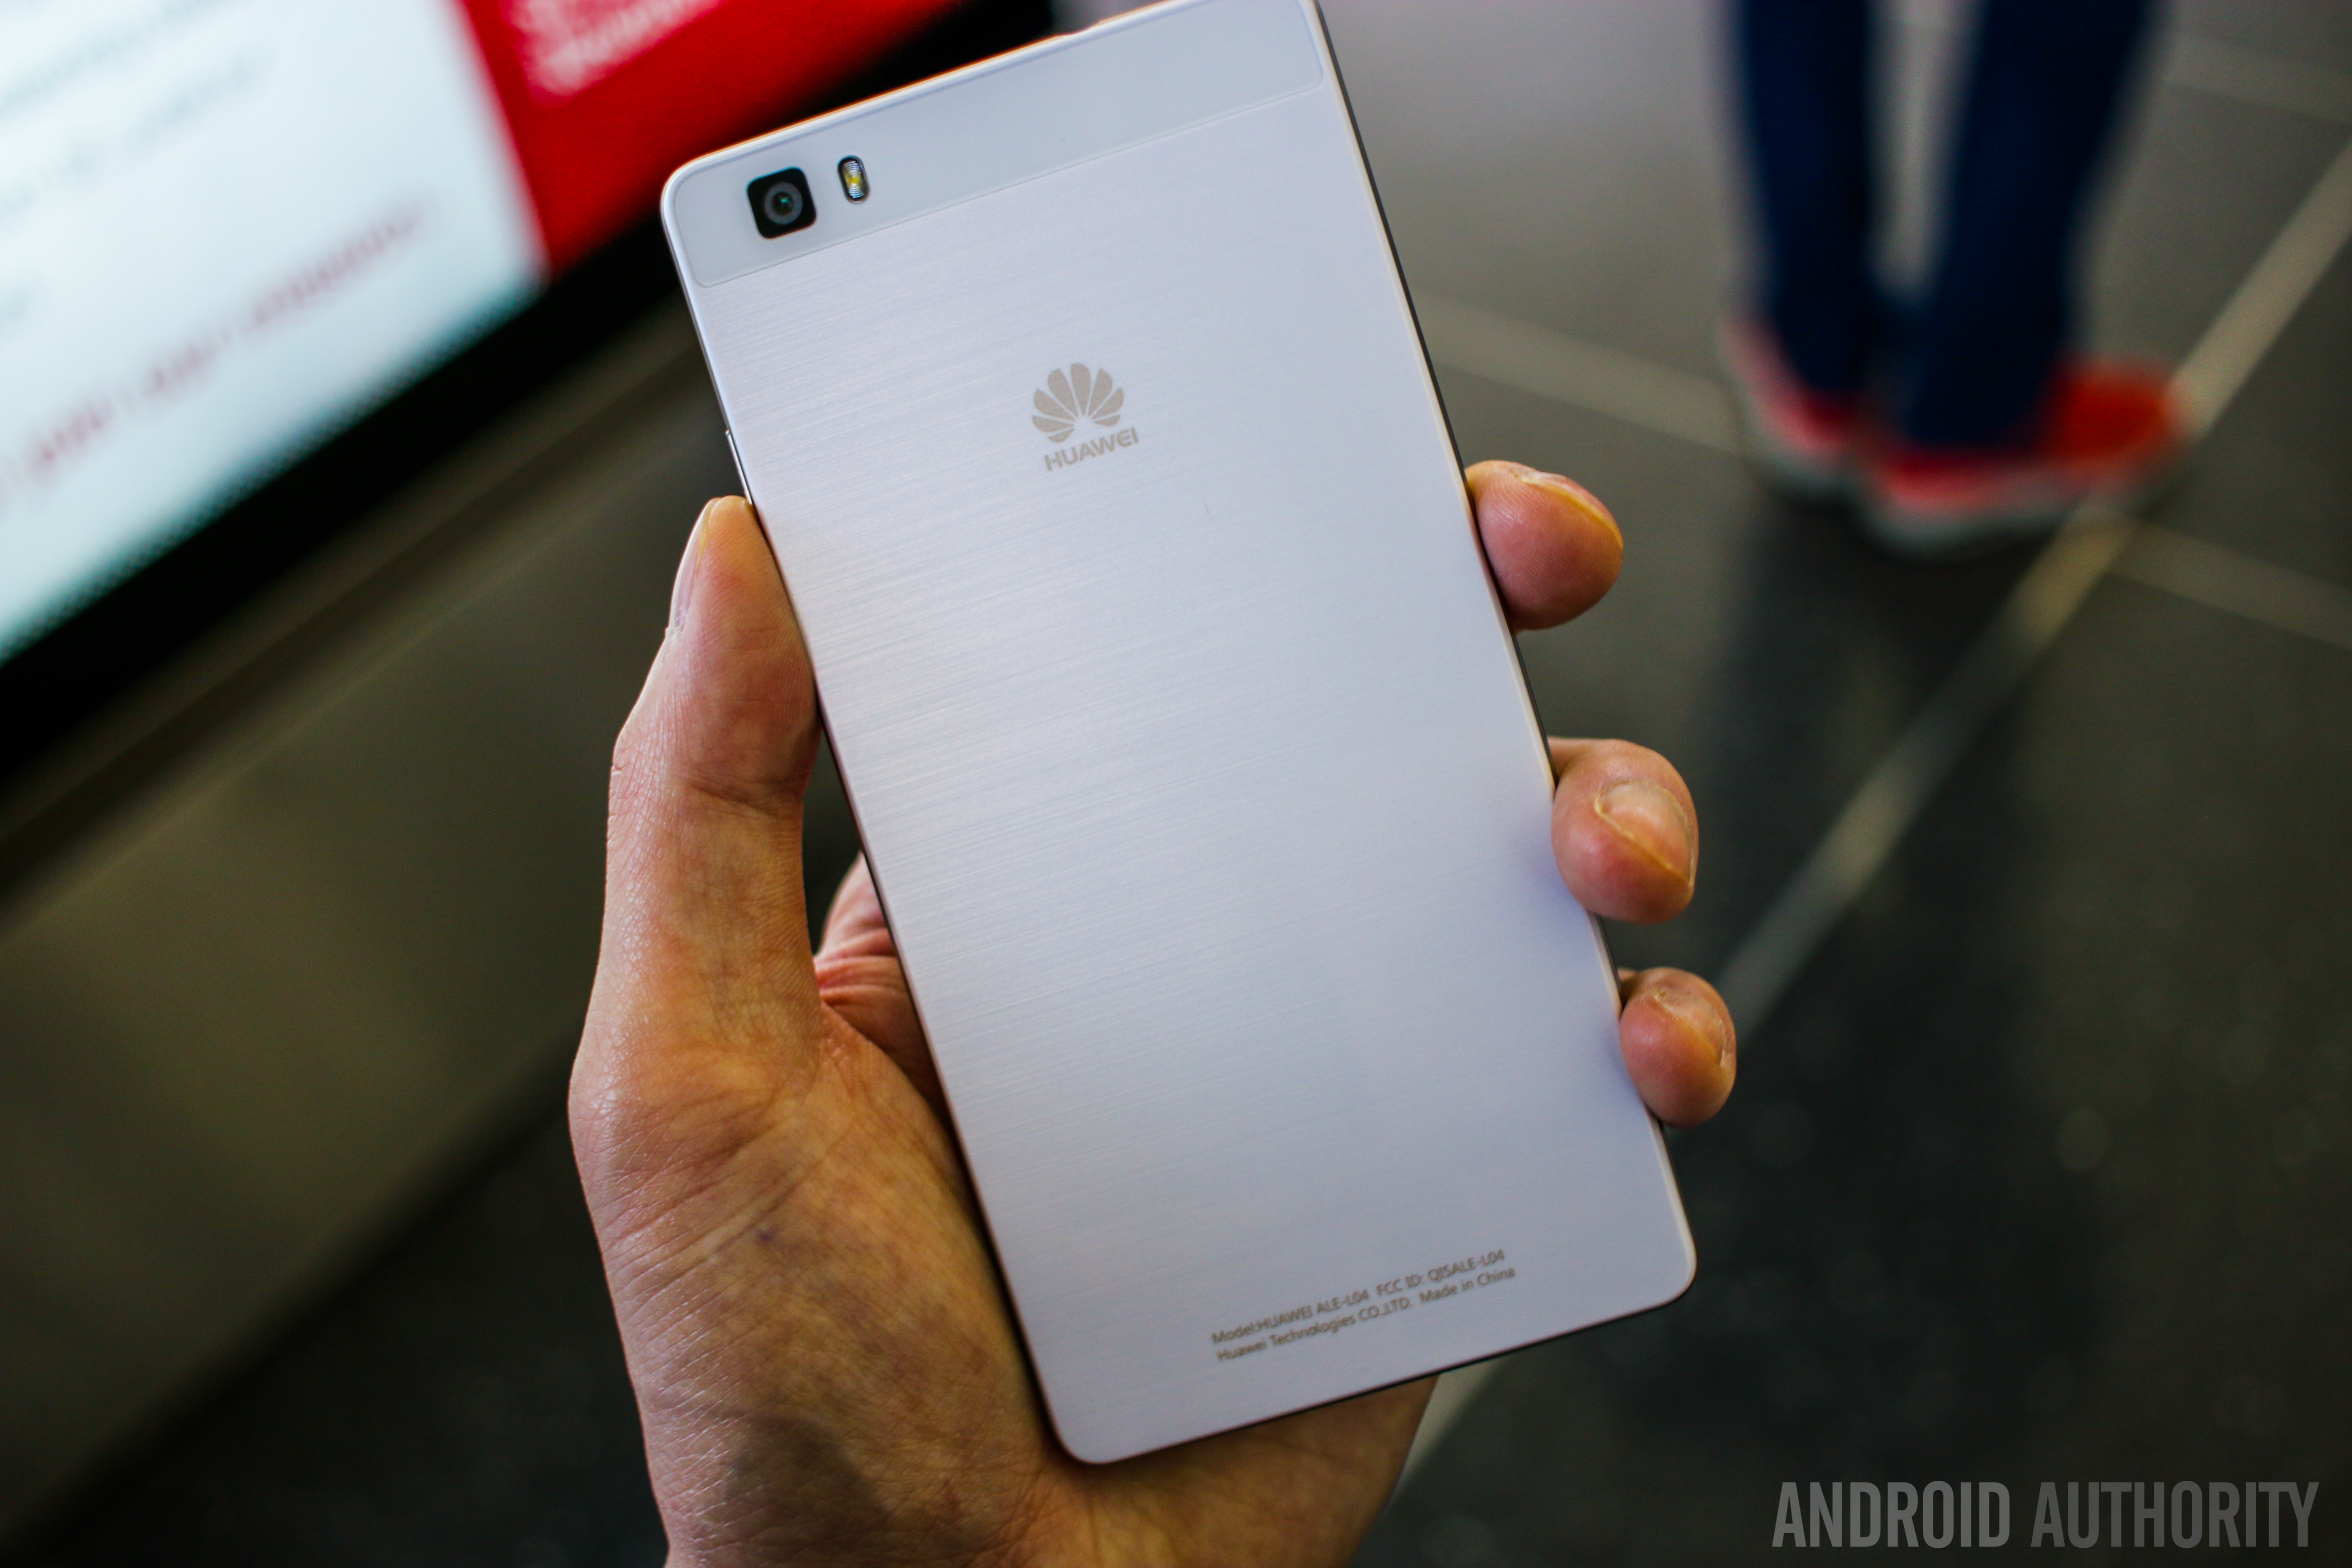 Bevatten compressie Bediende HUAWEI P8 Lite announced, coming to the U.S. today